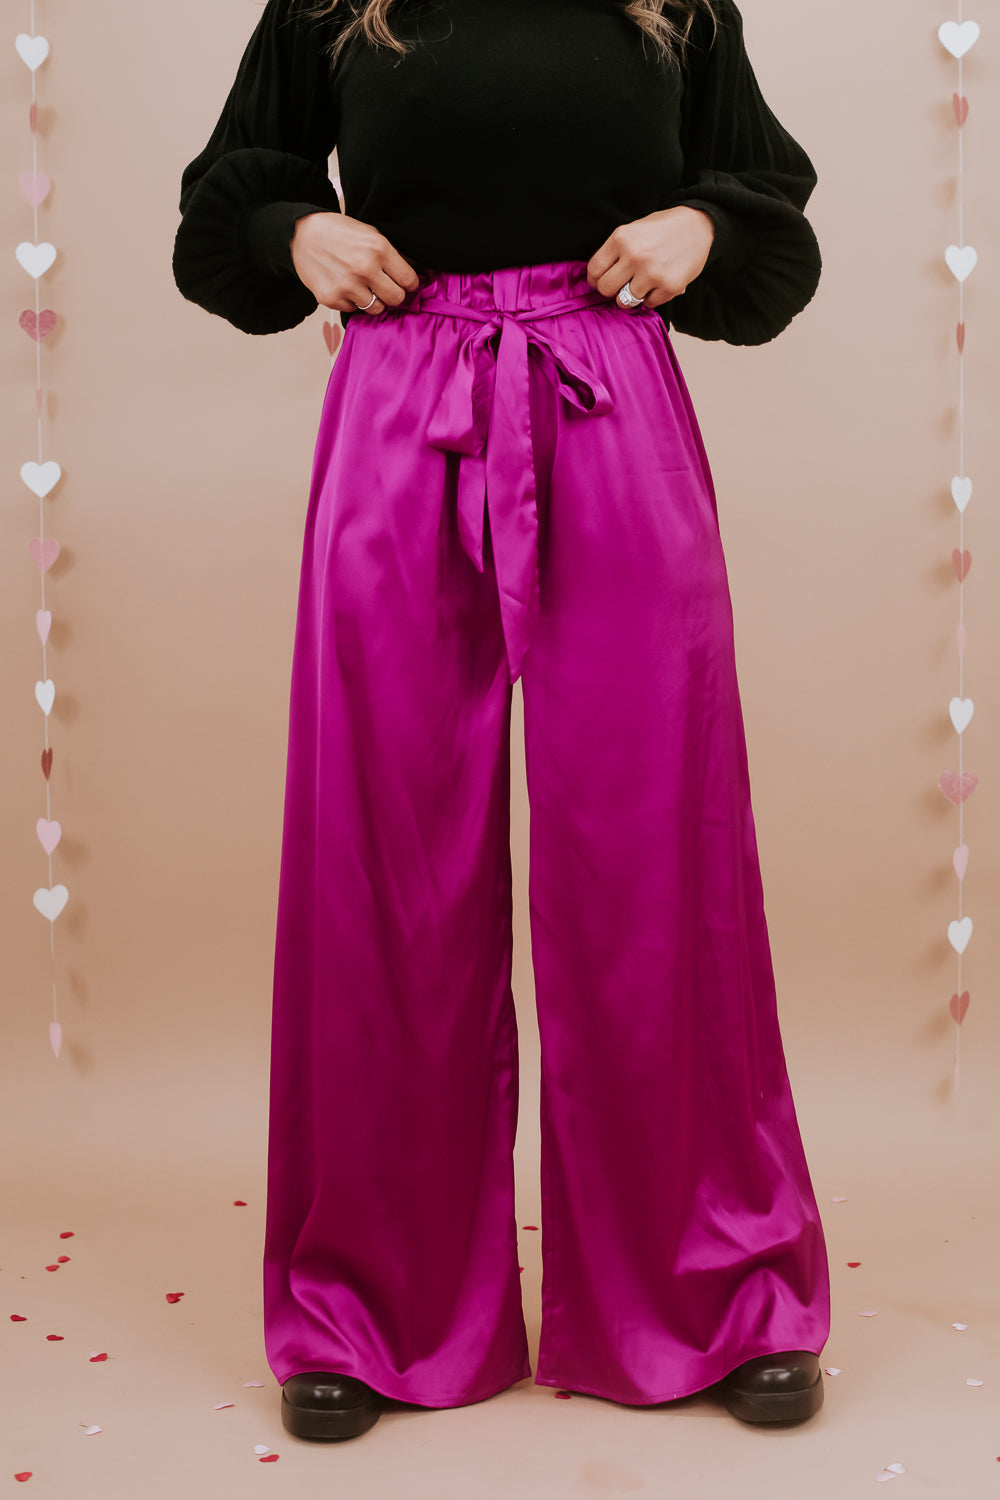 Delta T Boutique - Living for these pink satin pants 💗 click the